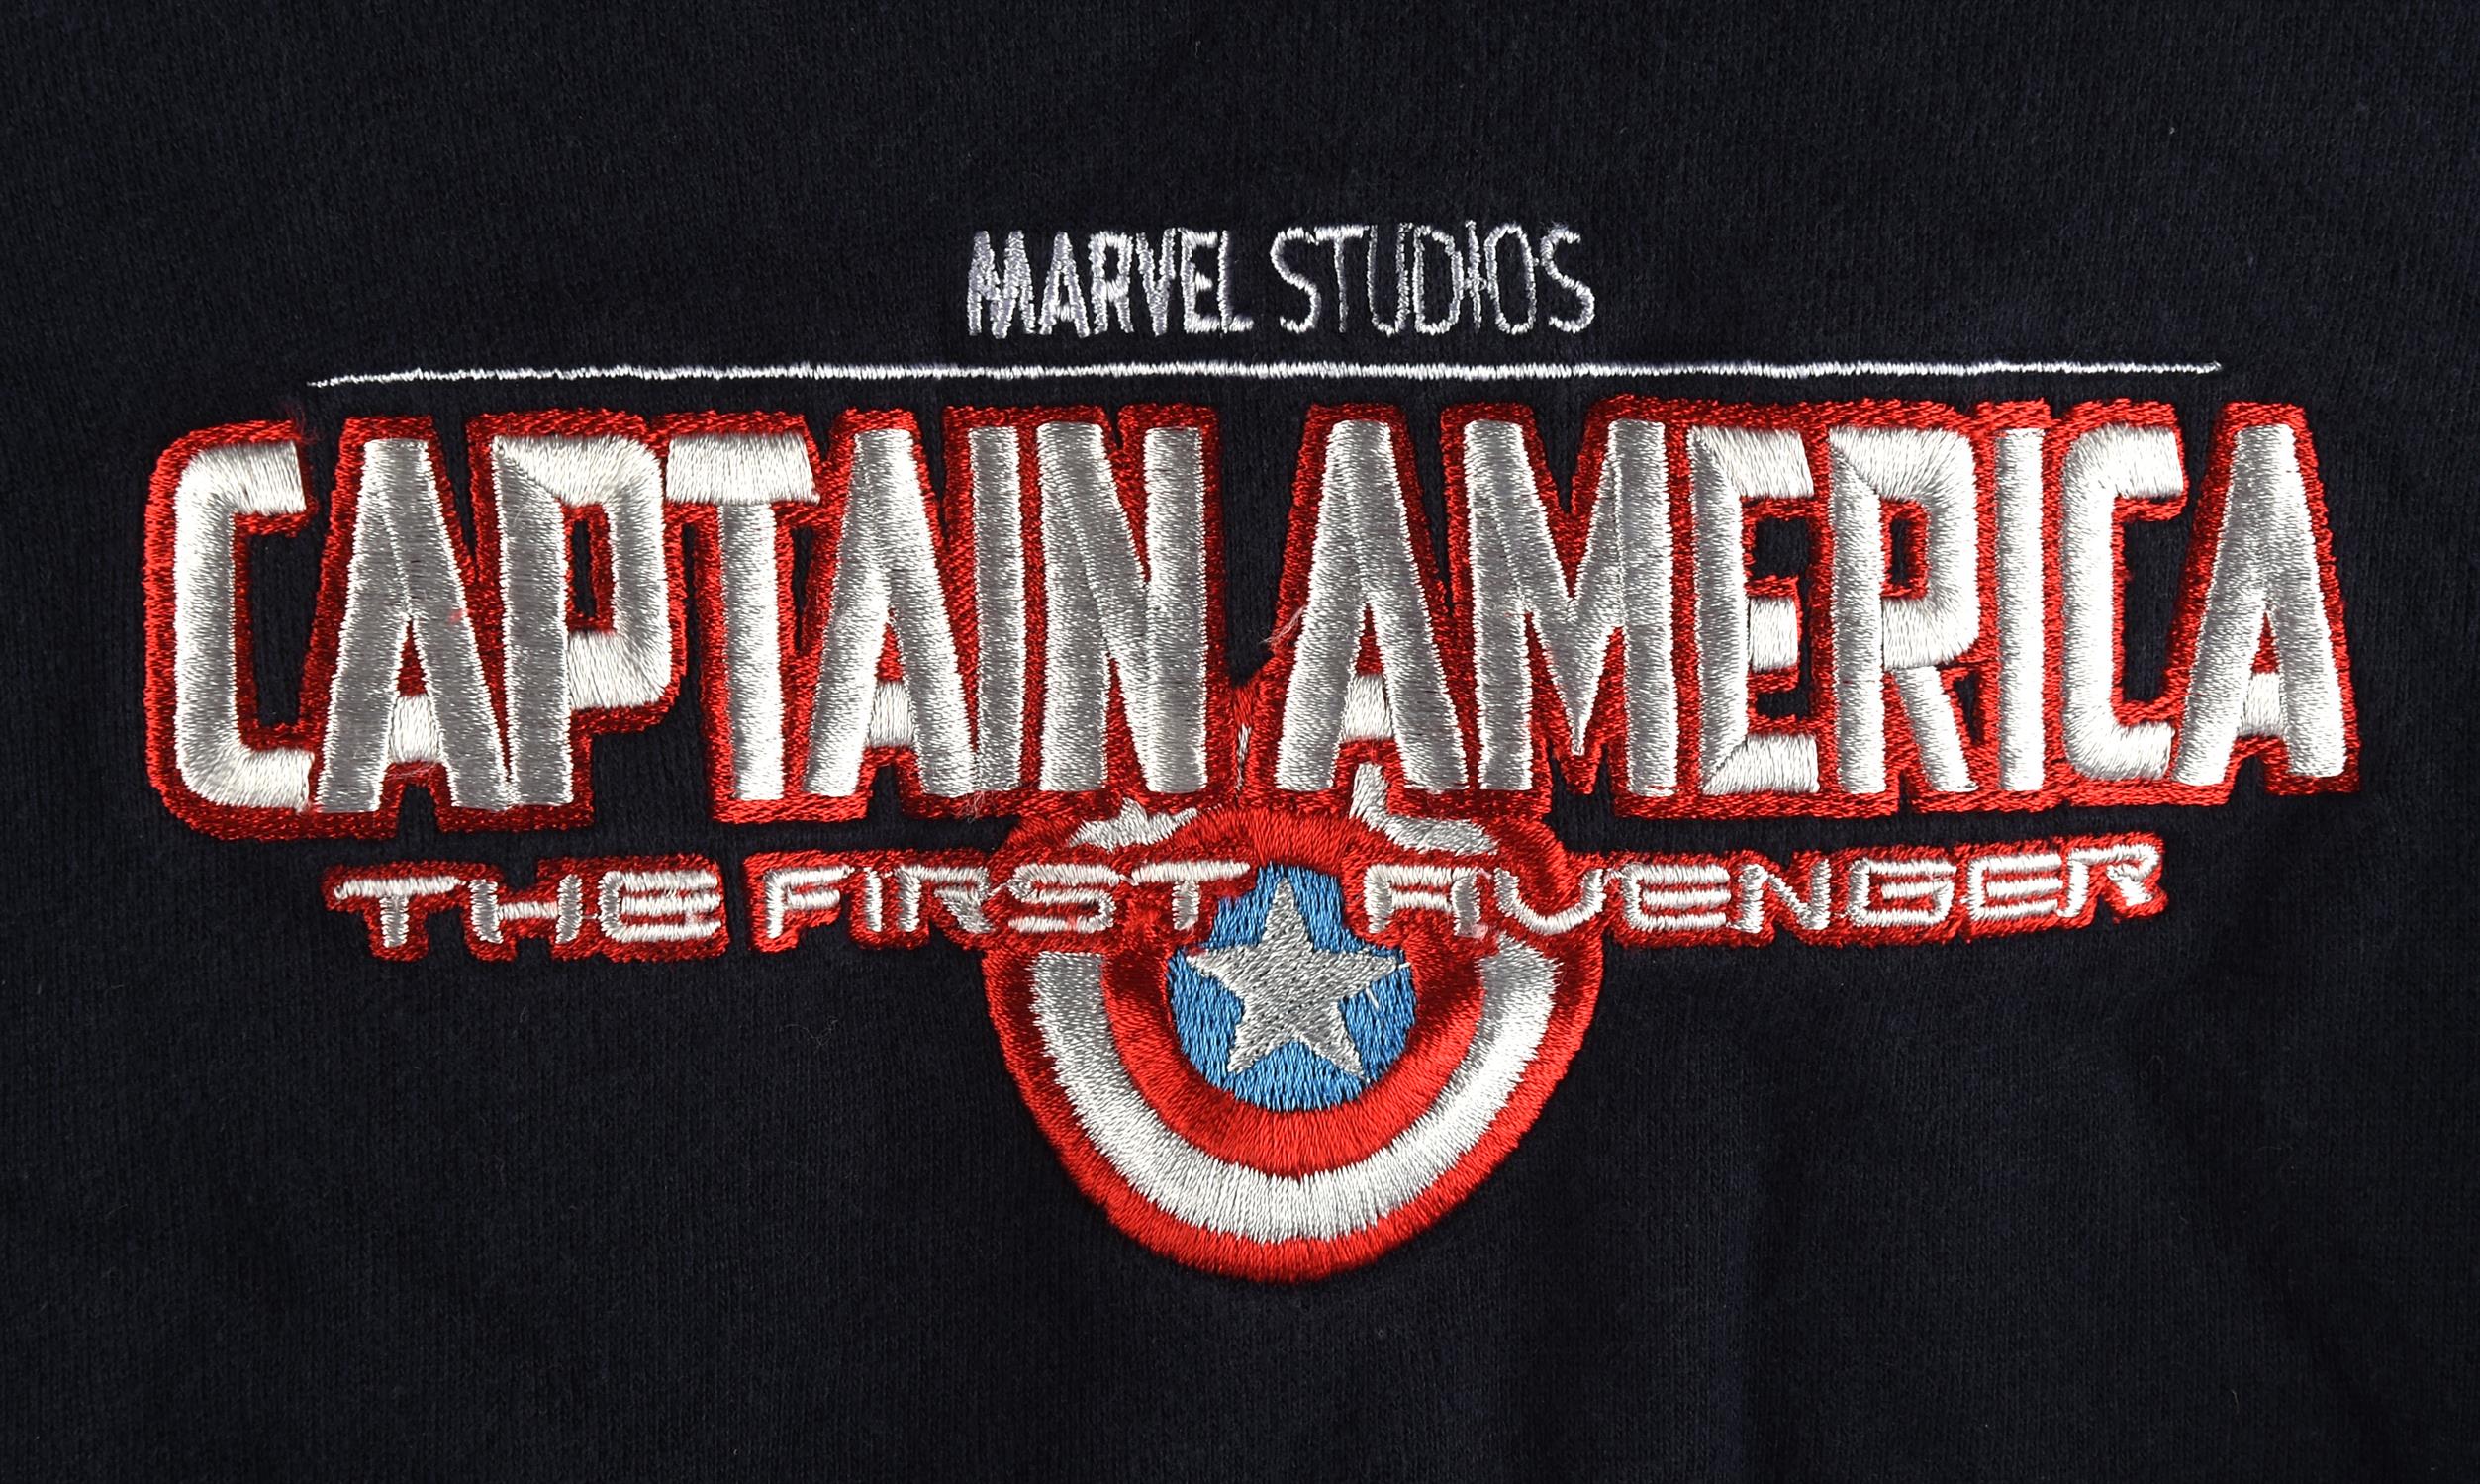 Collection Four Crew Sweatshirts and Hoodies - To include Captain America (XL), White Nights (XL), - Image 3 of 6